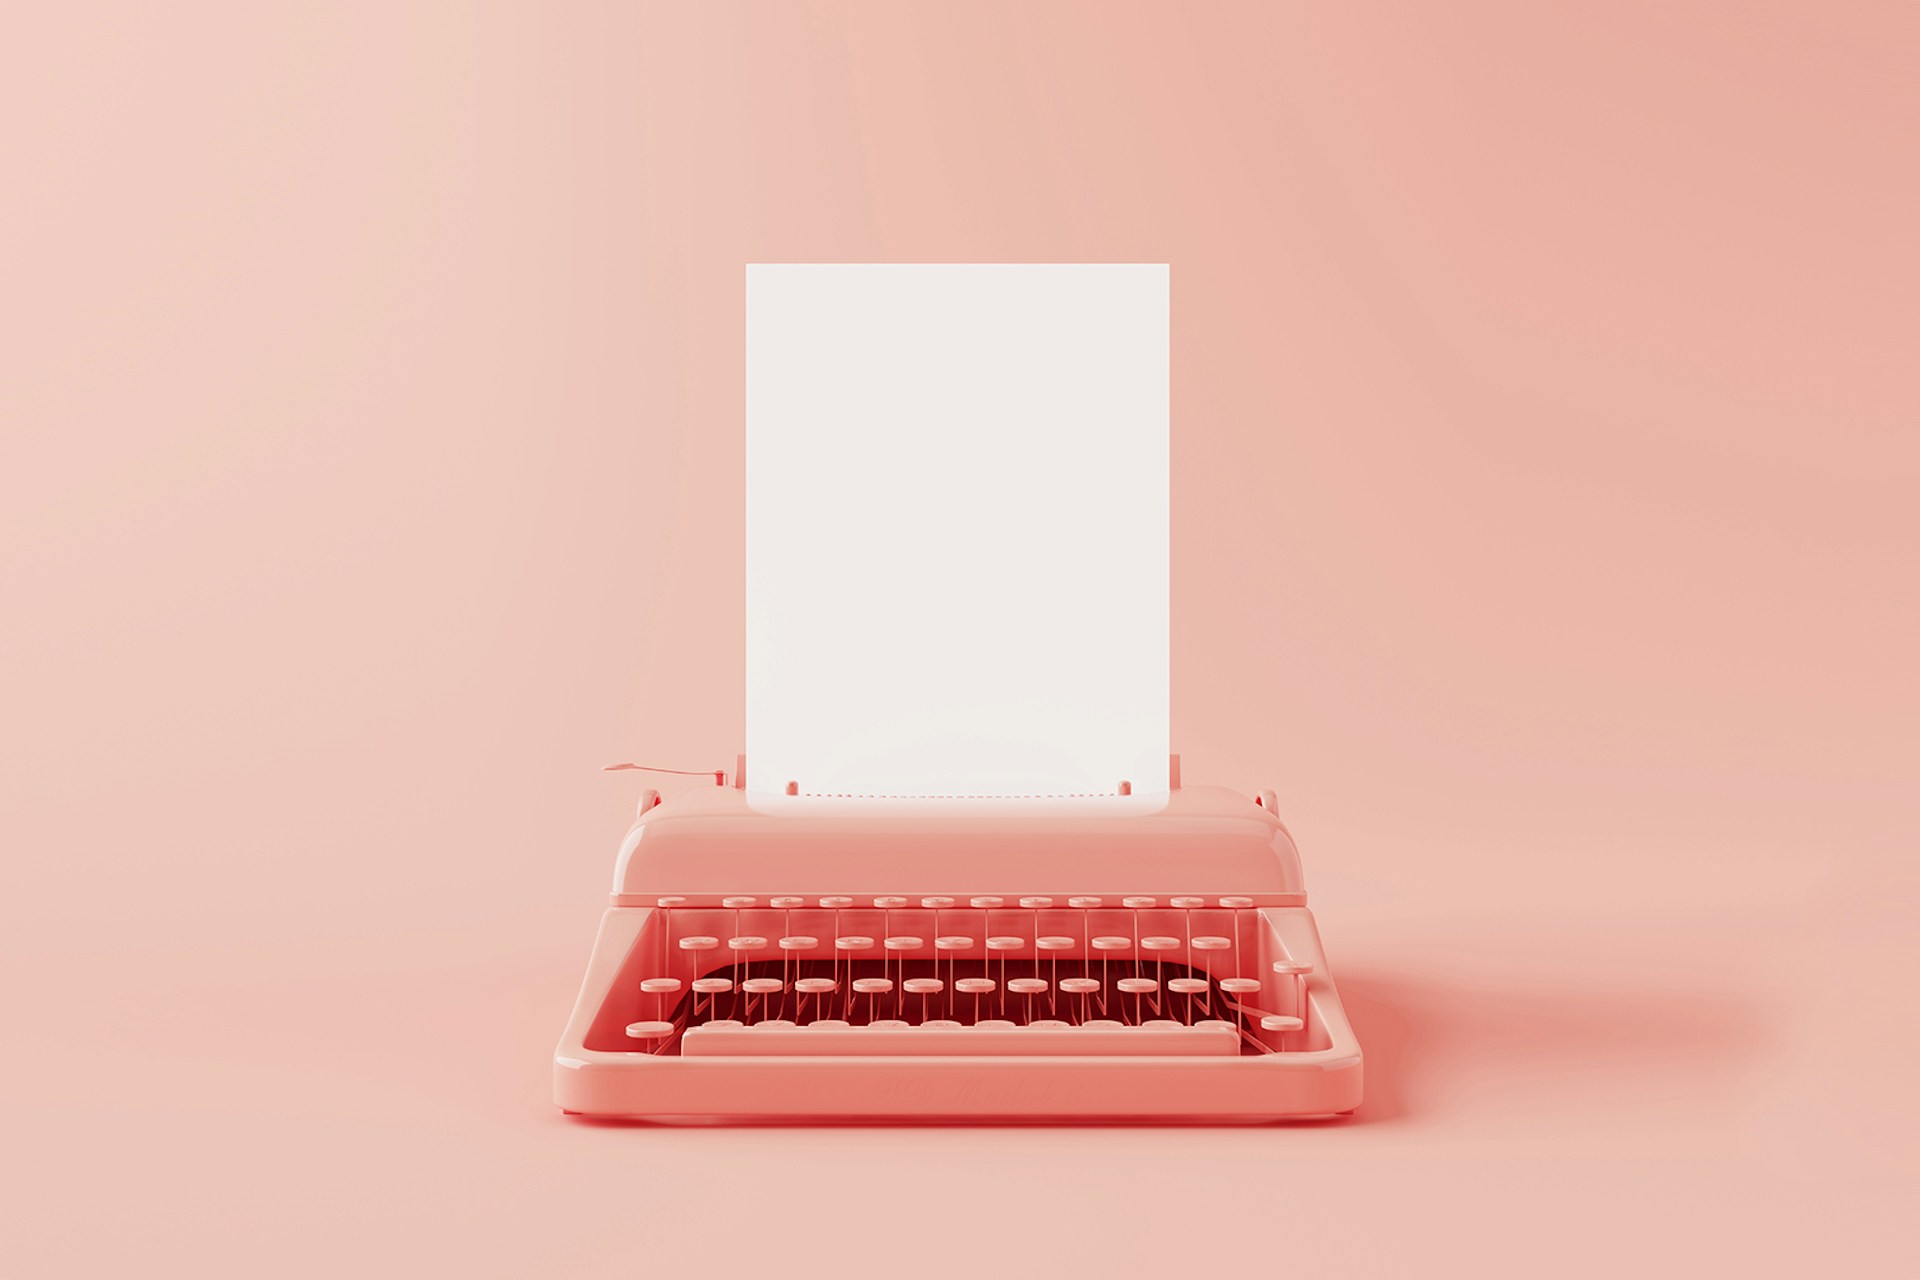 A pink typewriter in the center of the image with a blank white piece of paper sticking out of the top. When writing a story, every storyteller begins with an empty blank piece of paper, and this blog post describes the process of the art of storytelling.